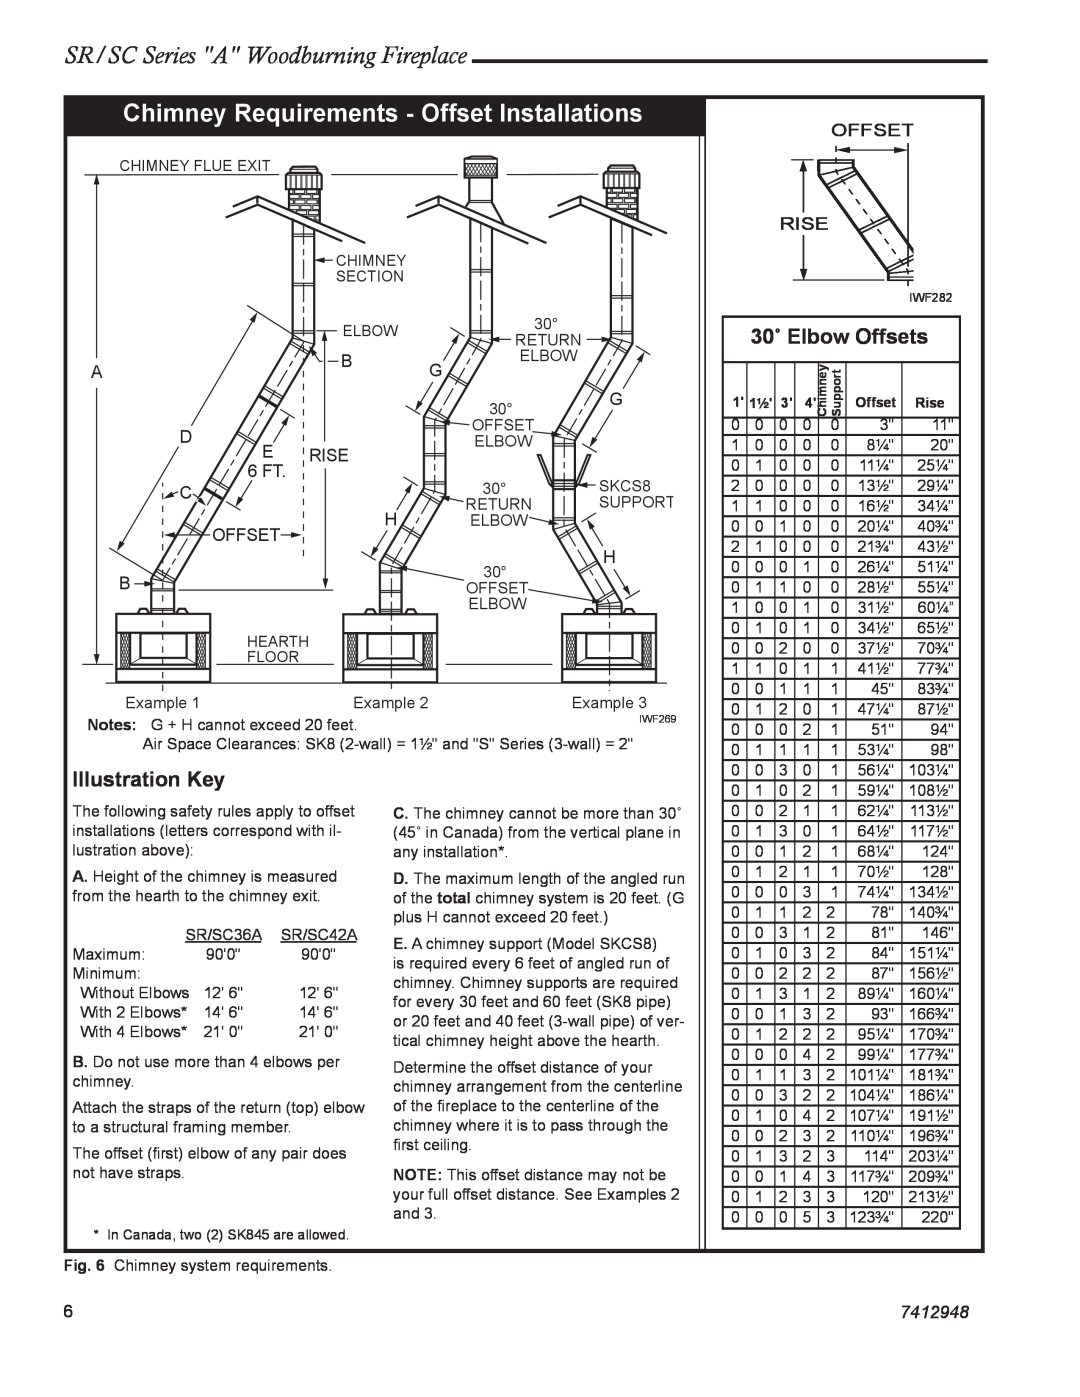 Vermont Casting SC42A, SR42A Chimney Requirements - Offset Installations, 30˚ Elbow Offsets, Illustration Key, 7412948 